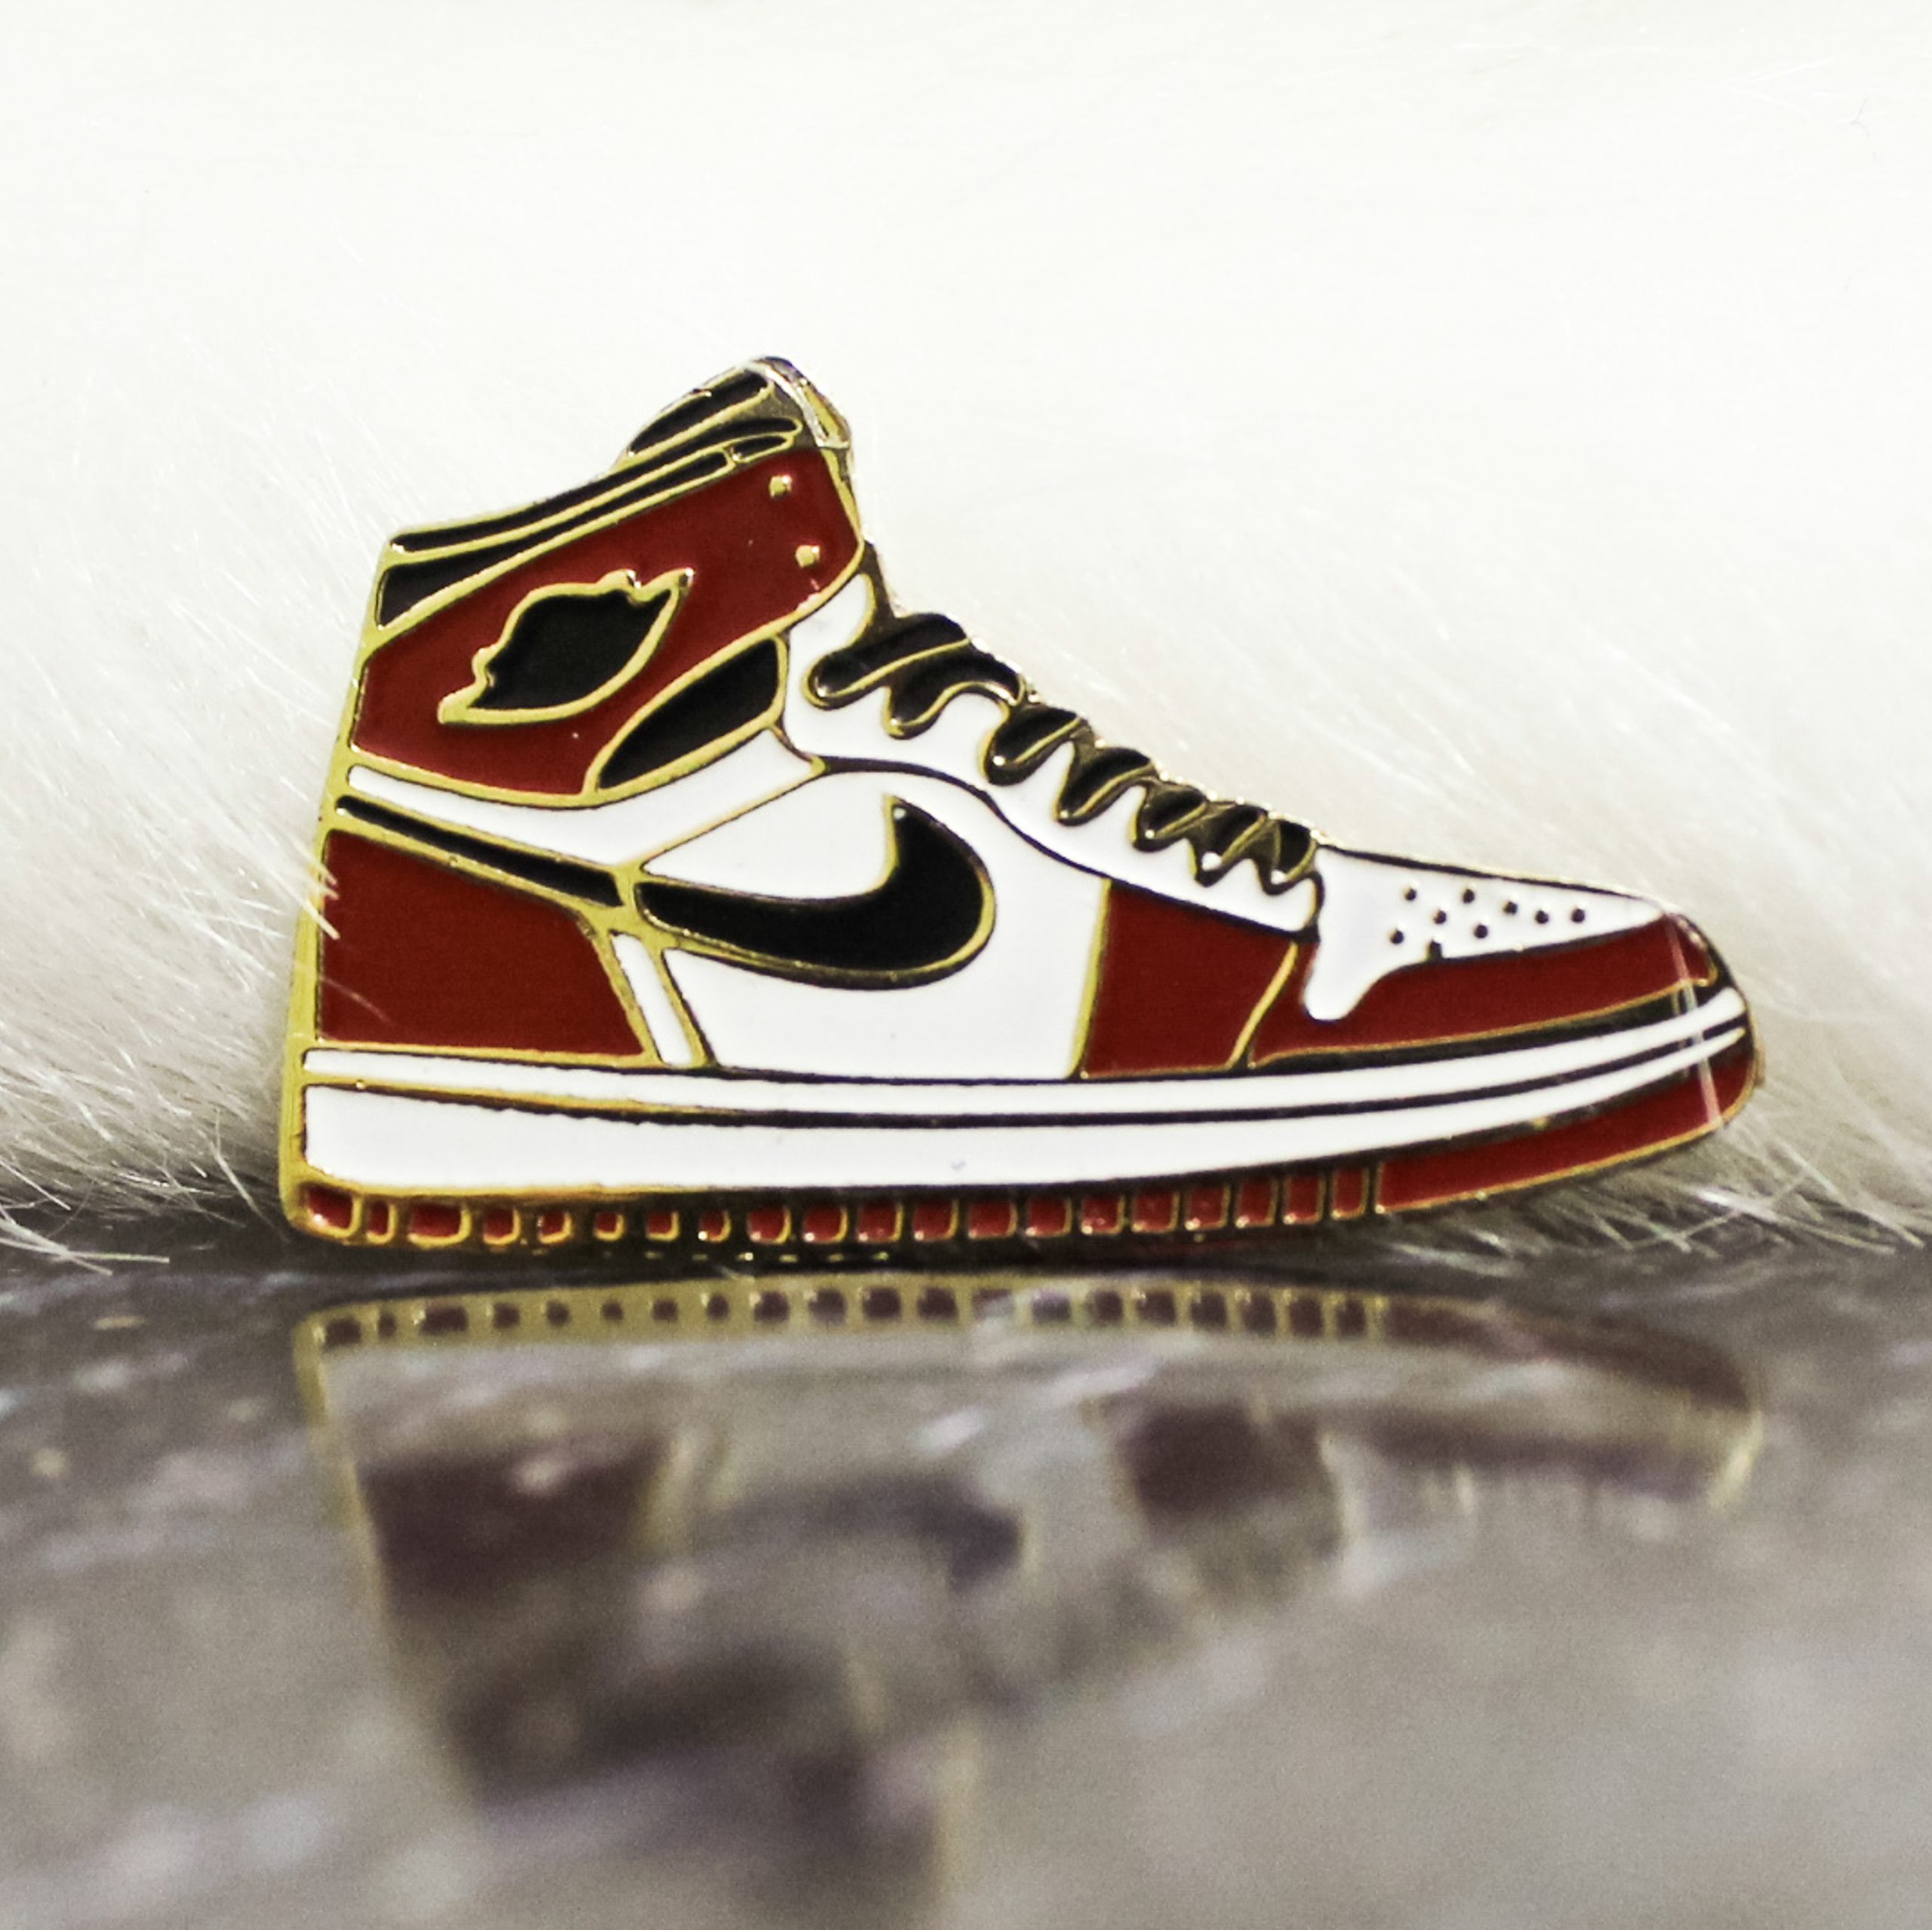 Lapel pins online | Buy the PINITUP Nike Lapel Pin for Girl Boy | www.pinitup.in